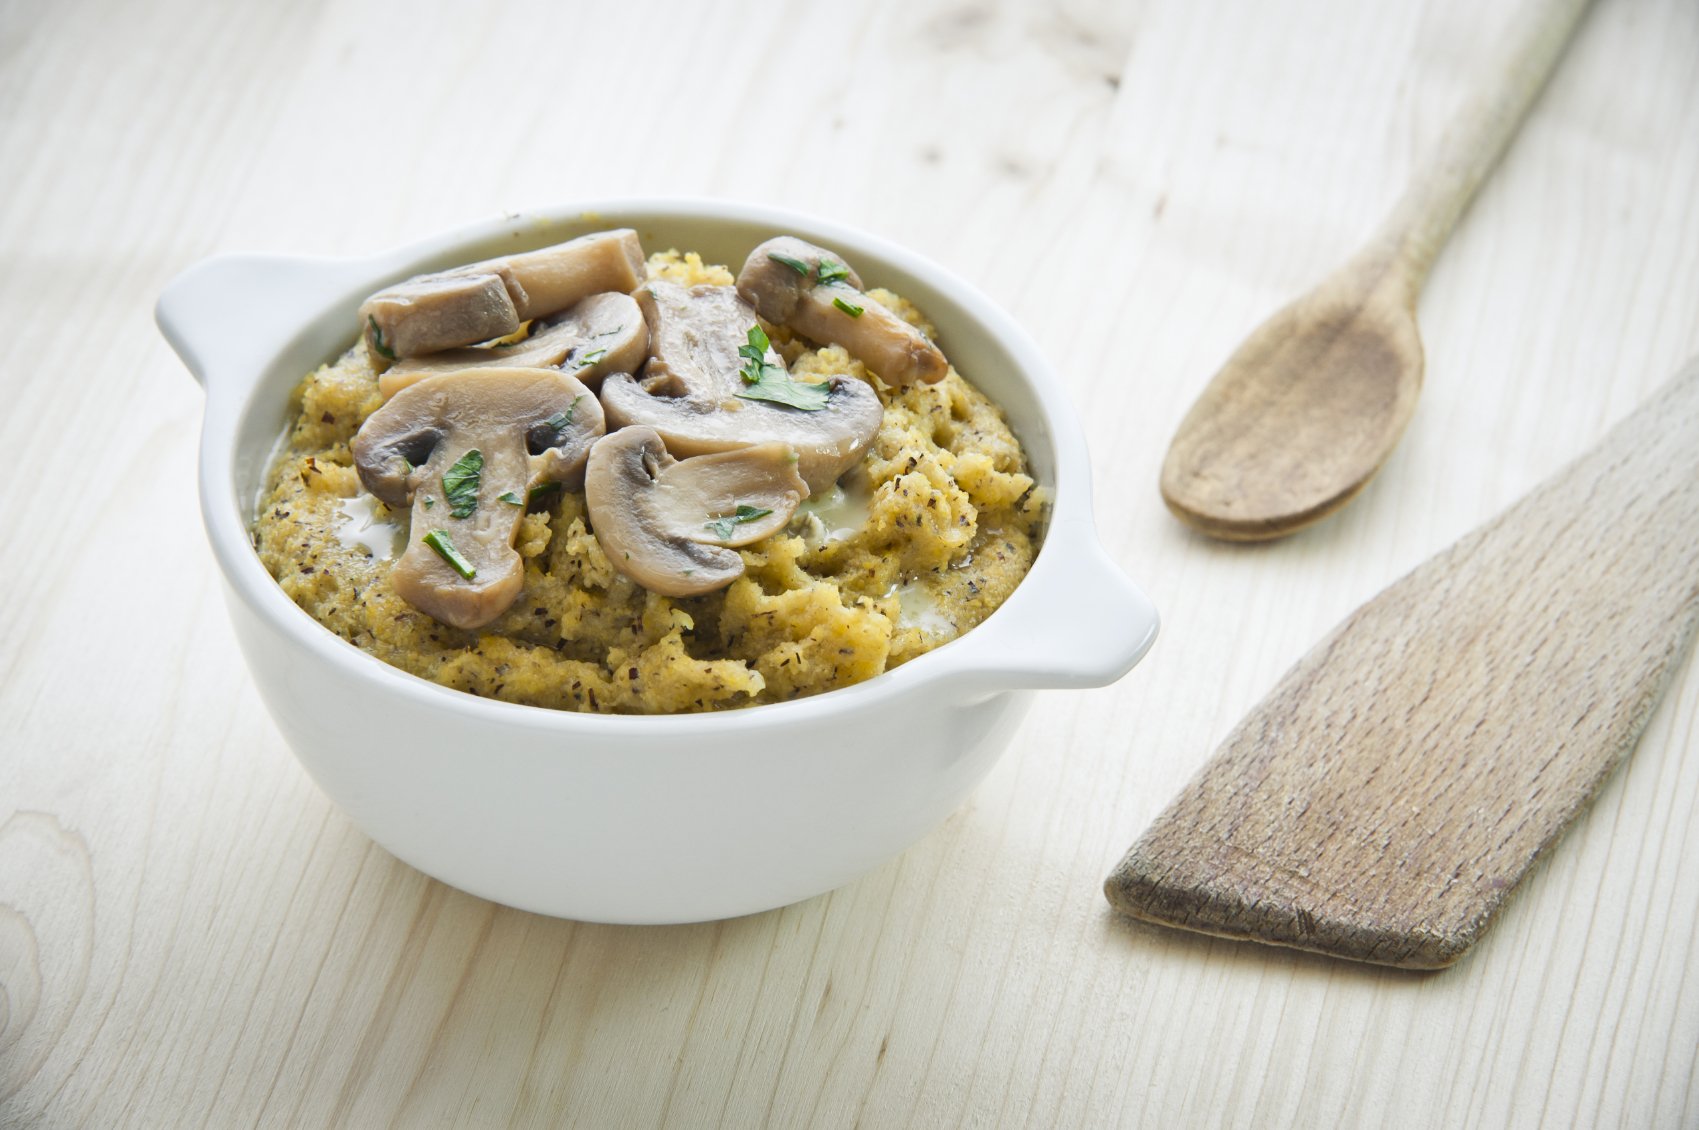 creamy polenta with mushrooms is a soft food thats easy to swallow